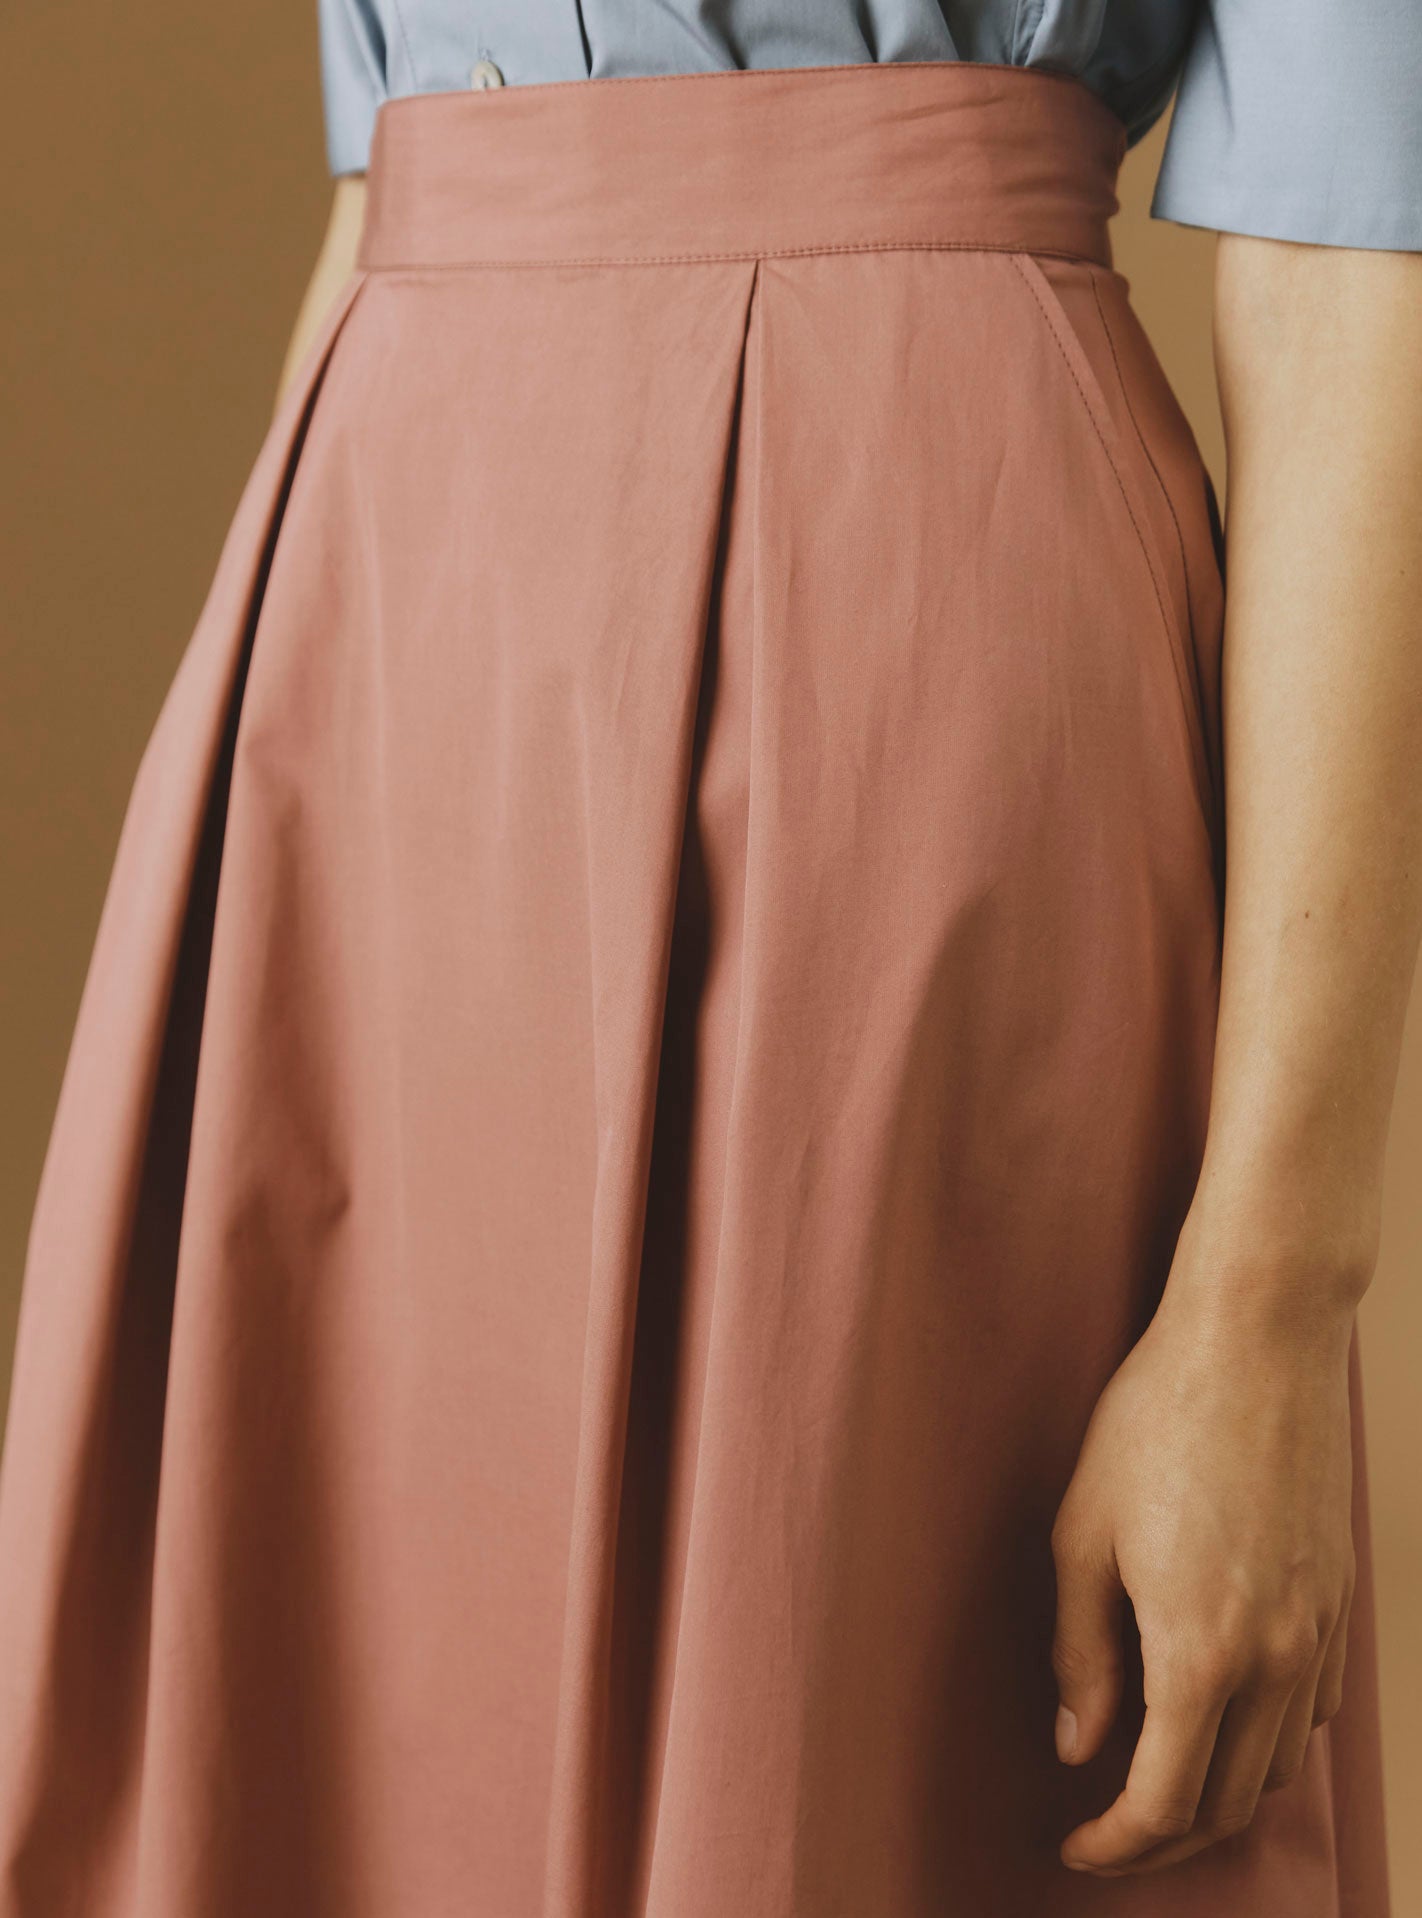 Detail - Wynona rosewood plain poplin cotton skirt by Thierry Colson